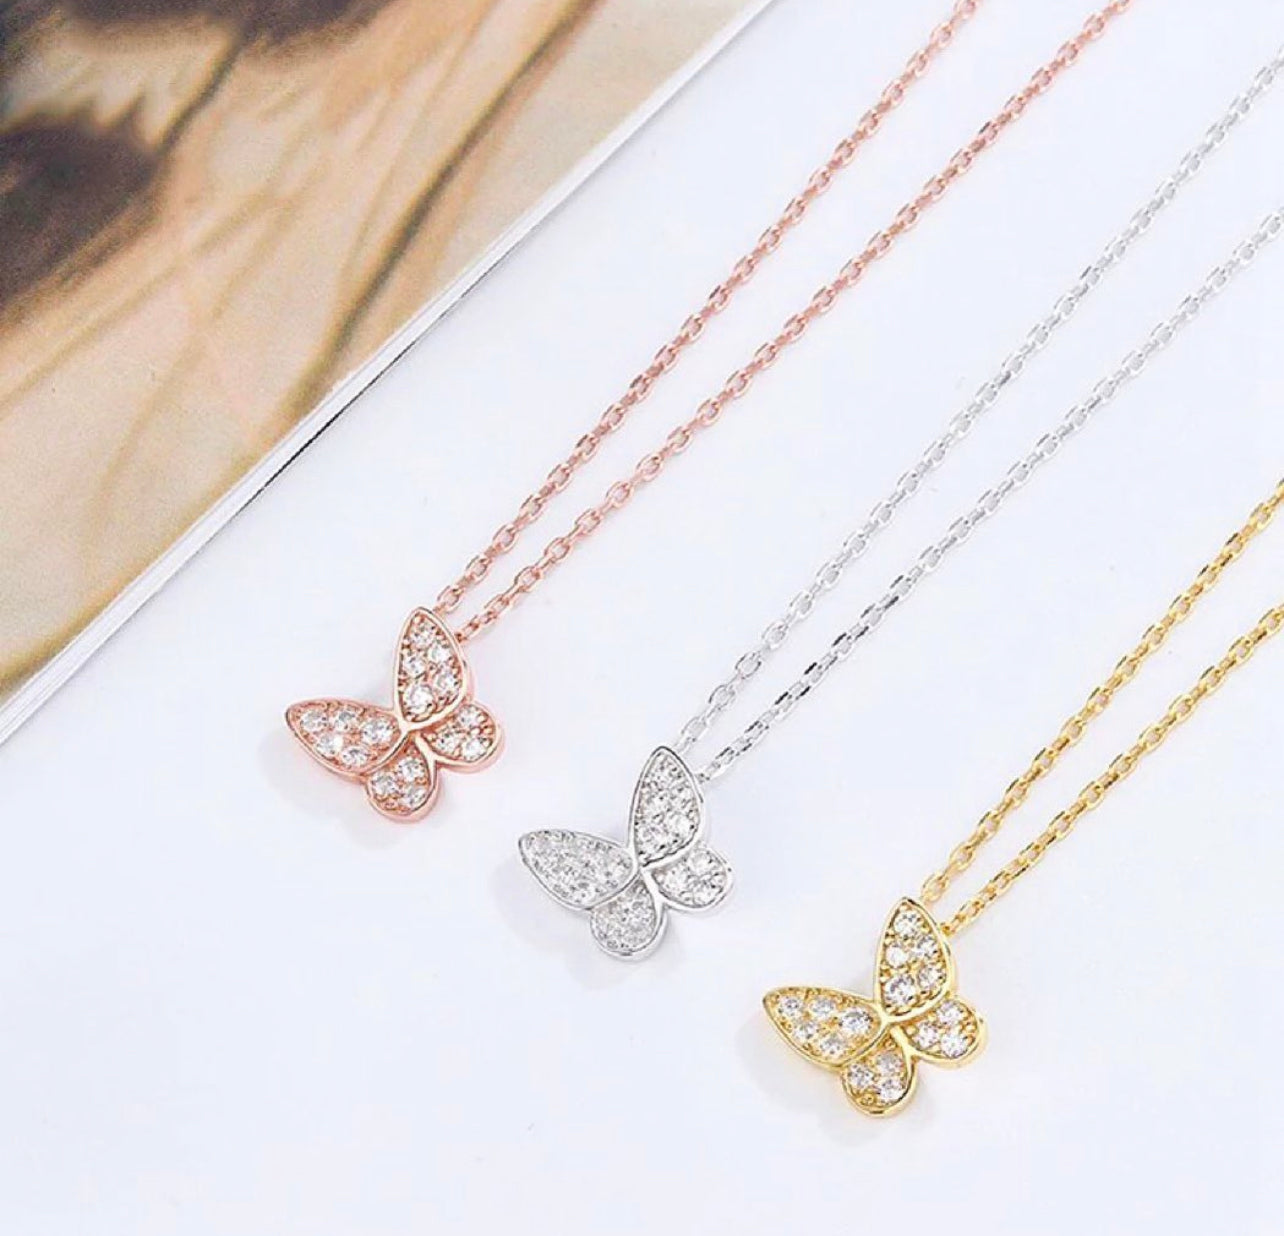 Sparkly and delicate, we love this Mini Butterfly Necklace!